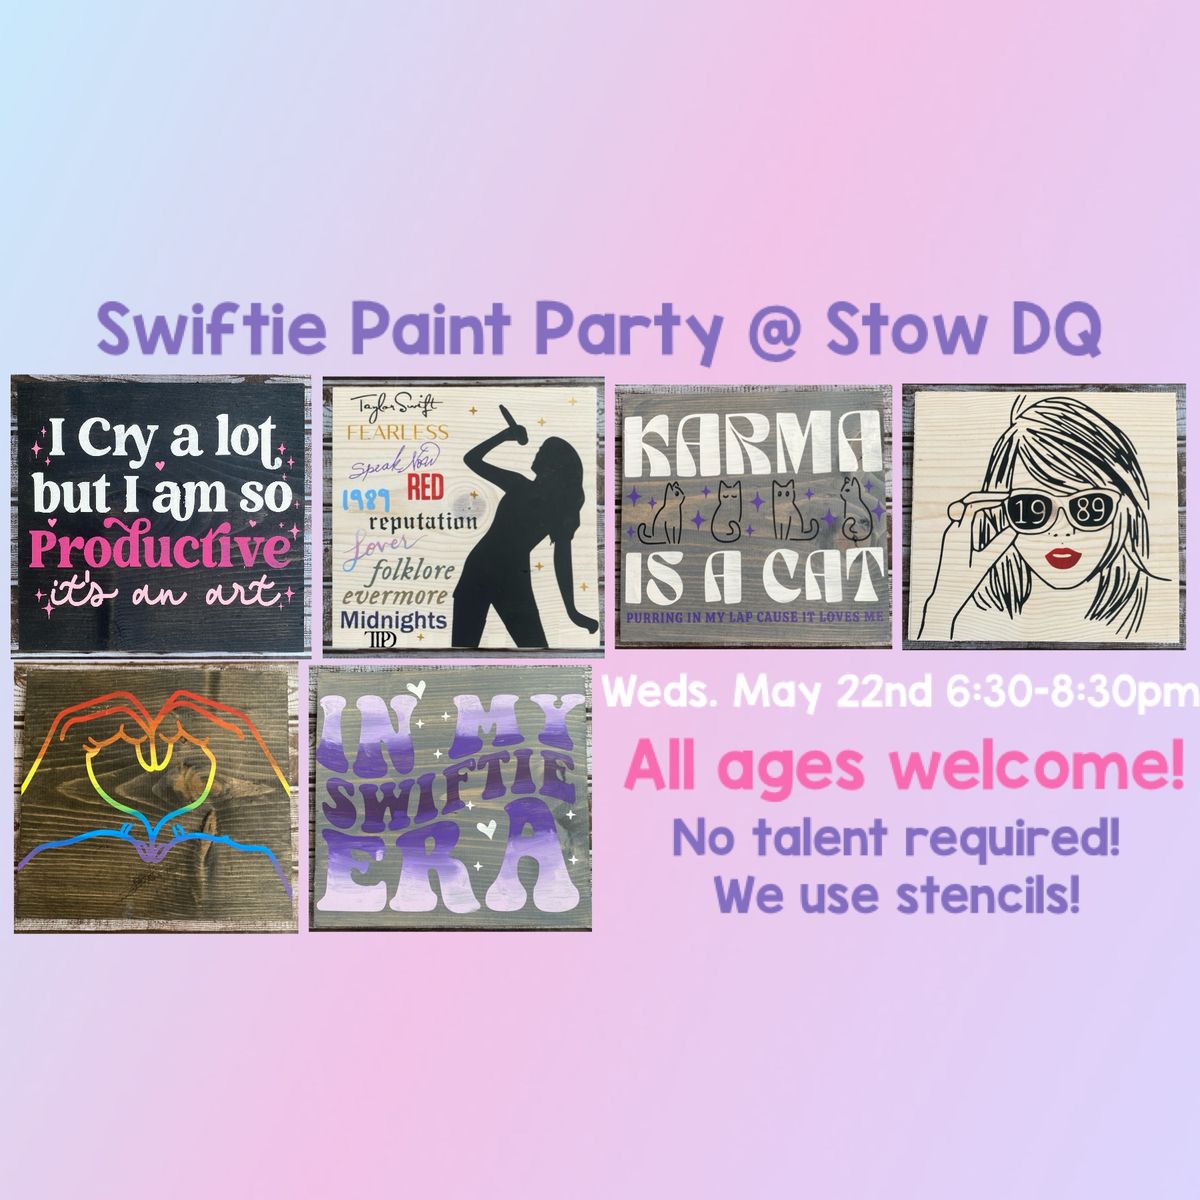 Swiftie Paint Party at Stow DQ